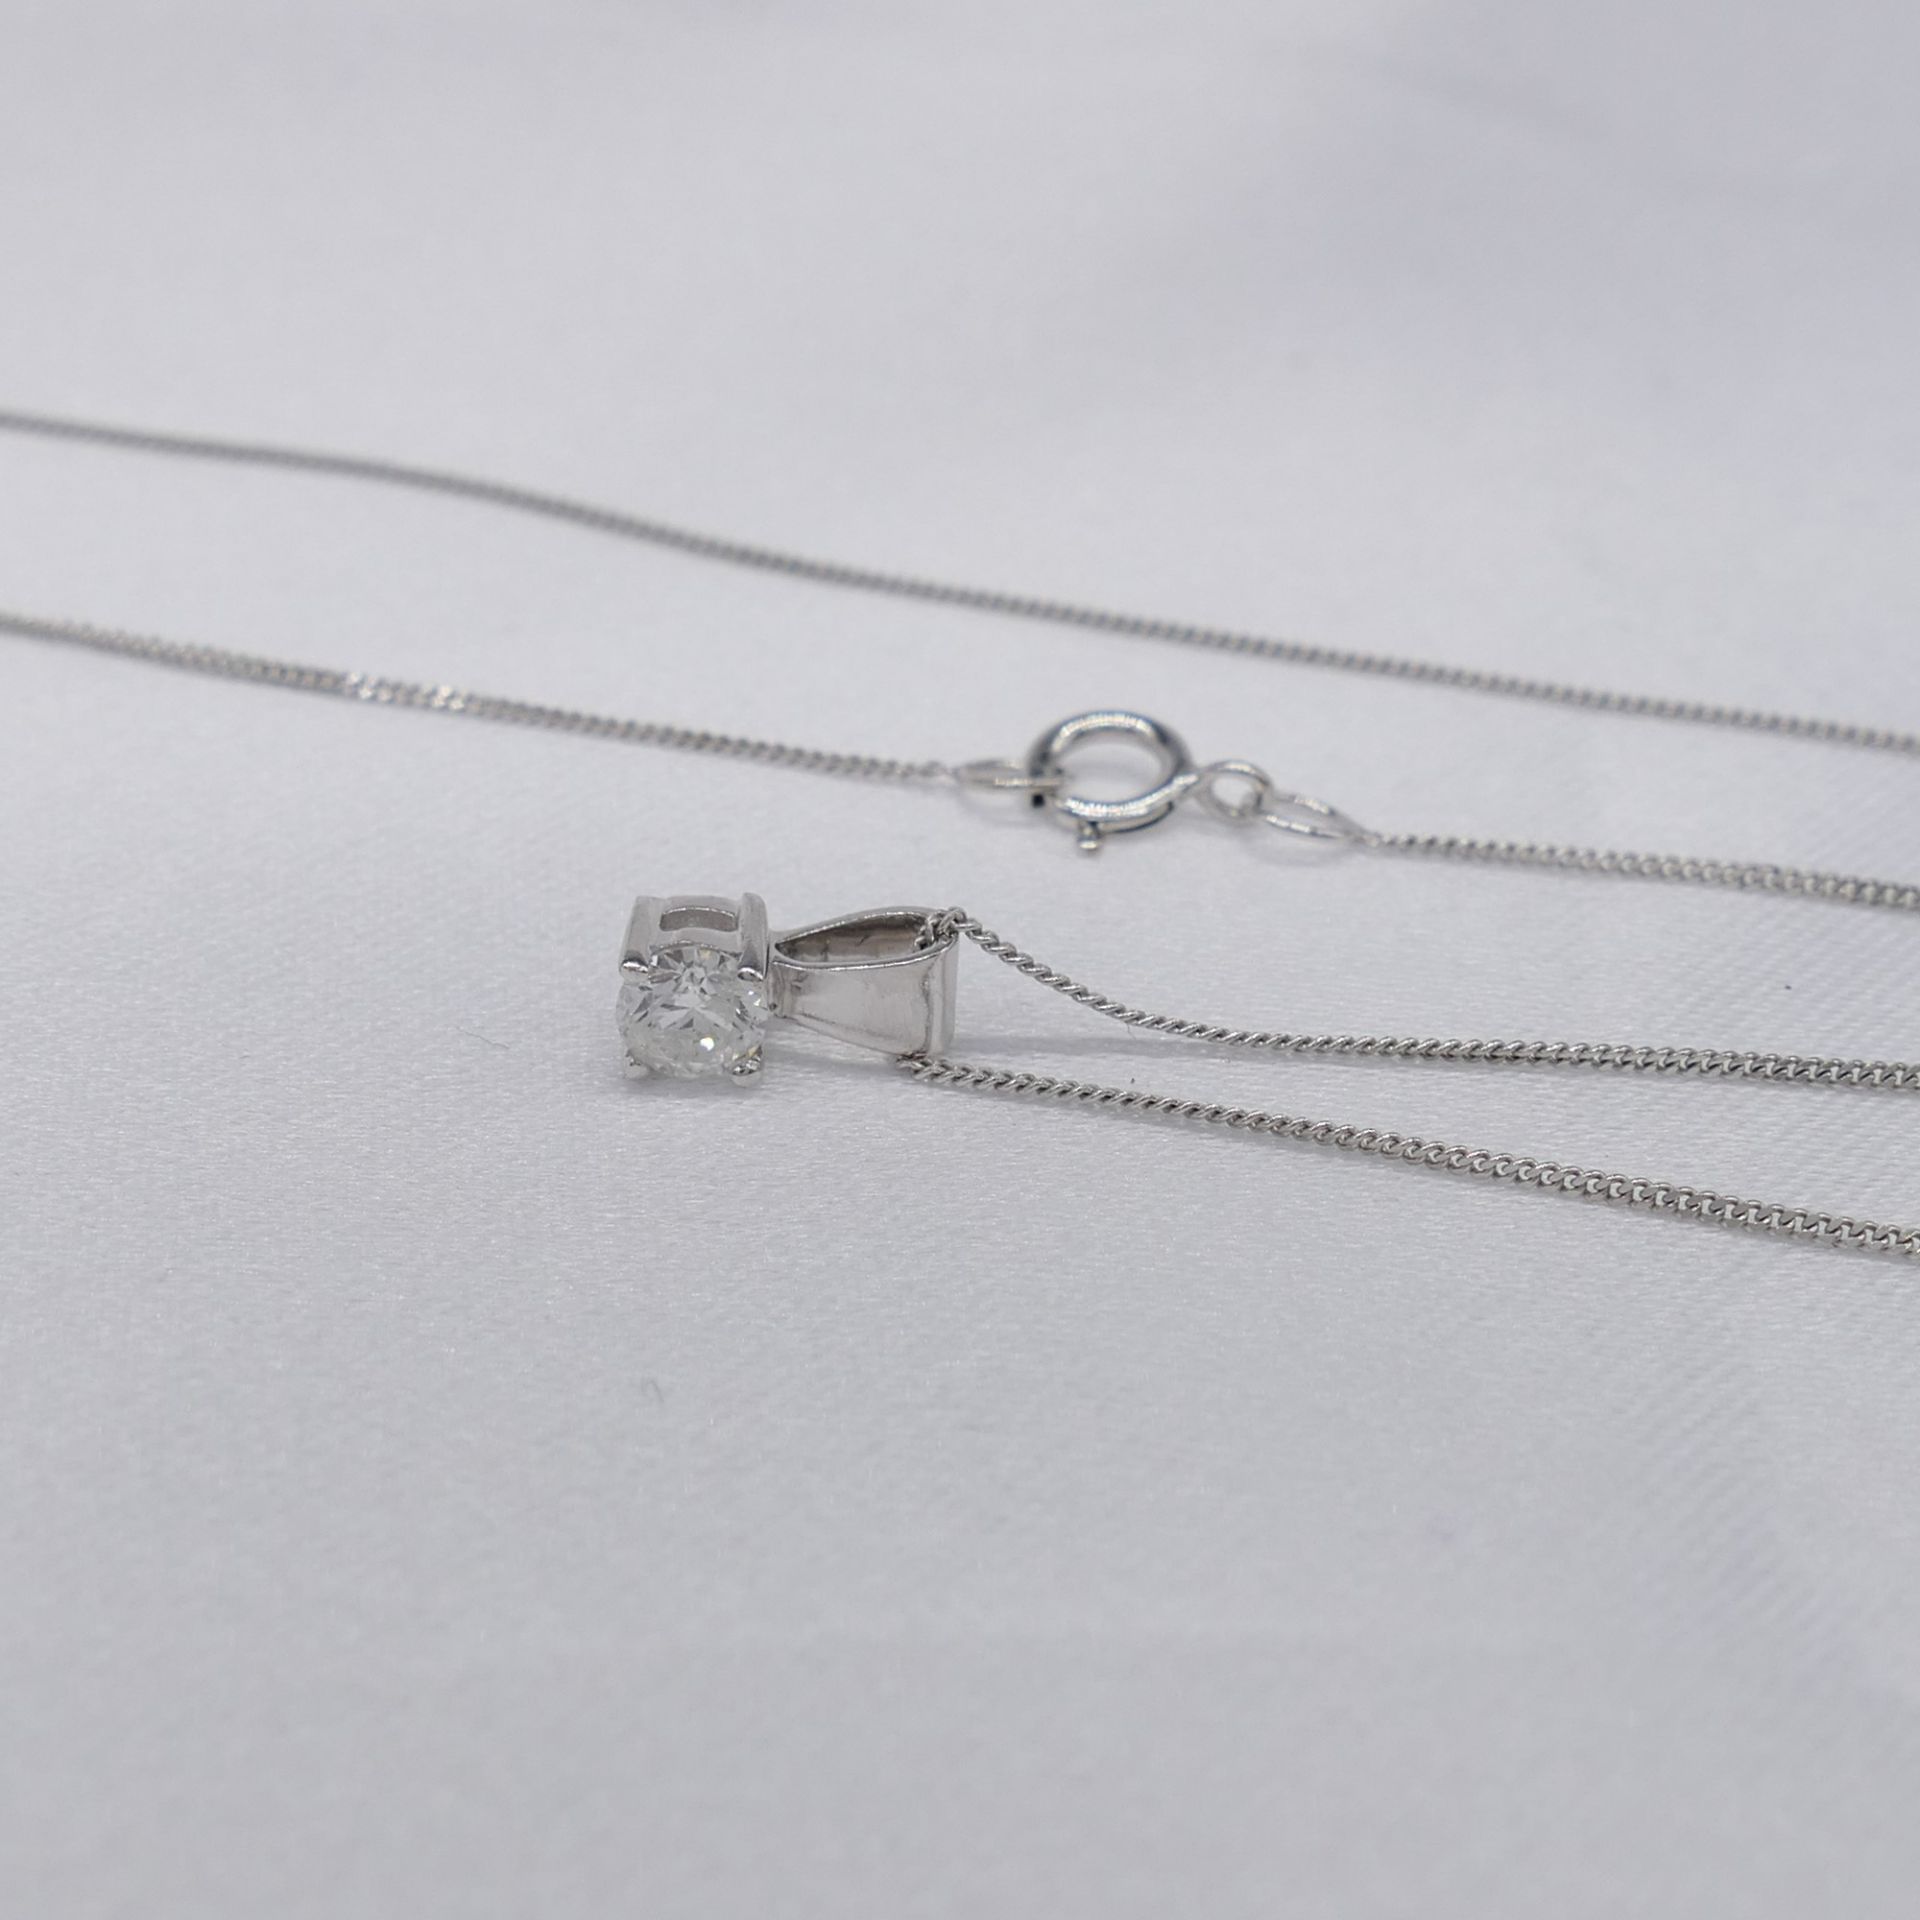 0.15 carat diamond solitaire necklace in white gol - Image 5 of 8